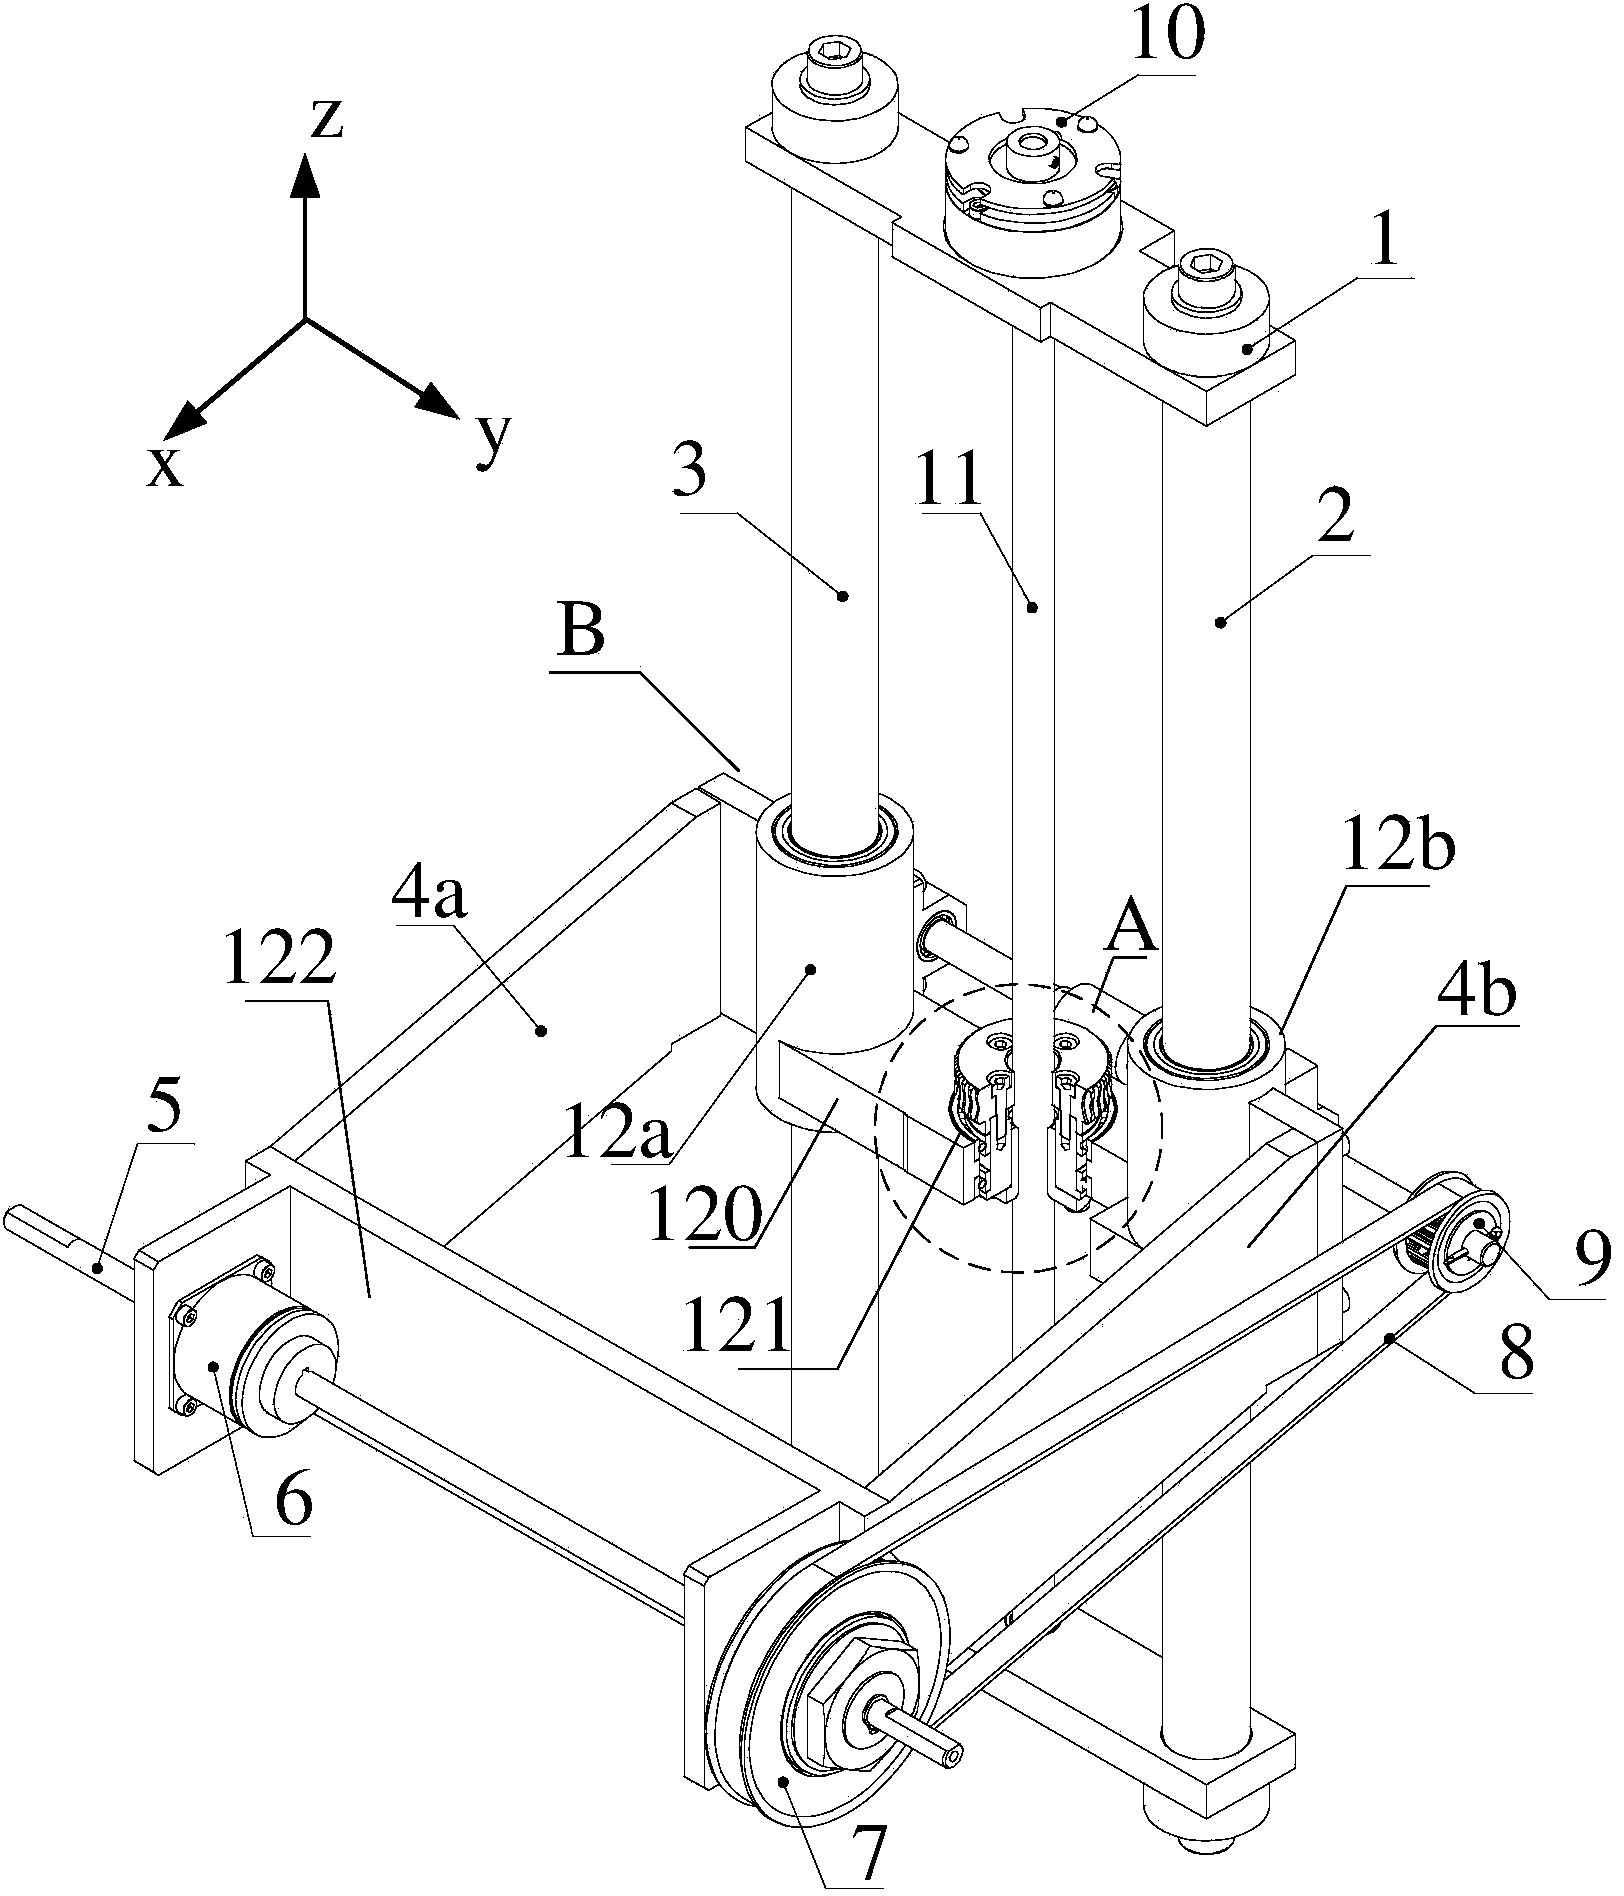 Breast X-ray radiography system and pressing device